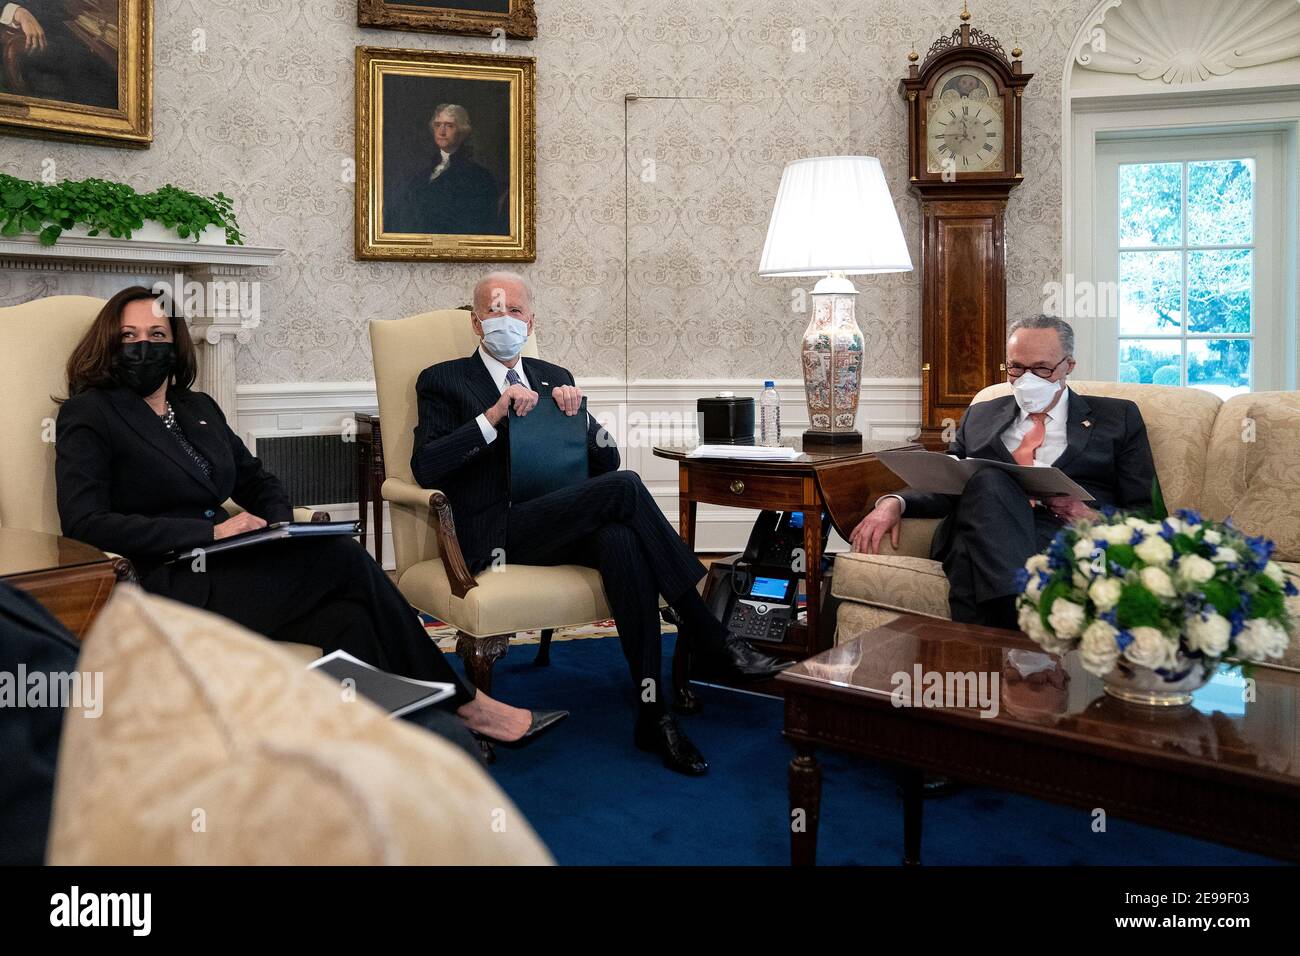 President Joe Biden, center, wears a protective mask while meeting with U.S. Vice President Kamala Harris, left, Senate Majority Leader Chuck Schumer (D-N.Y.), right, and Democratic Senators to discuss the American Rescue Plan in the Oval Office of the White House in Washington on Wednesday, February 3, 2021. Credit: Stefani Reynolds/Pool via CNP /MediaPunch Stock Photo